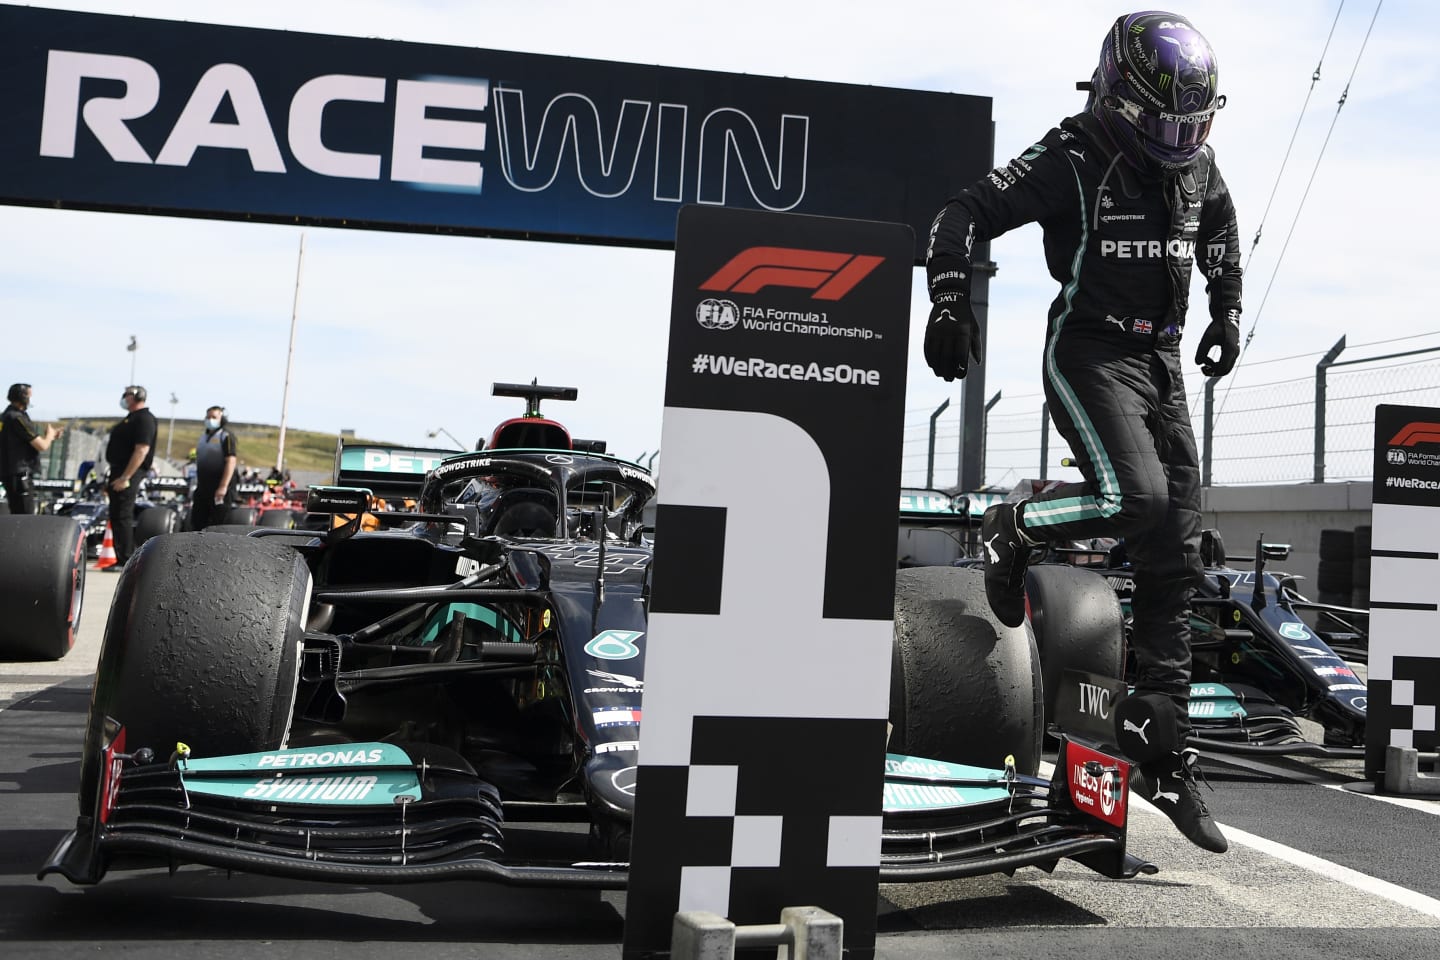 PORTIMAO, PORTUGAL - MAY 02: Race winner Lewis Hamilton of Great Britain and Mercedes GP celebrates in parc ferme after the F1 Grand Prix of Portugal at Autodromo Internacional Do Algarve on May 02, 2021 in Portimao, Portugal. (Photo by Gabriel Bouys - Pool/Getty Images)